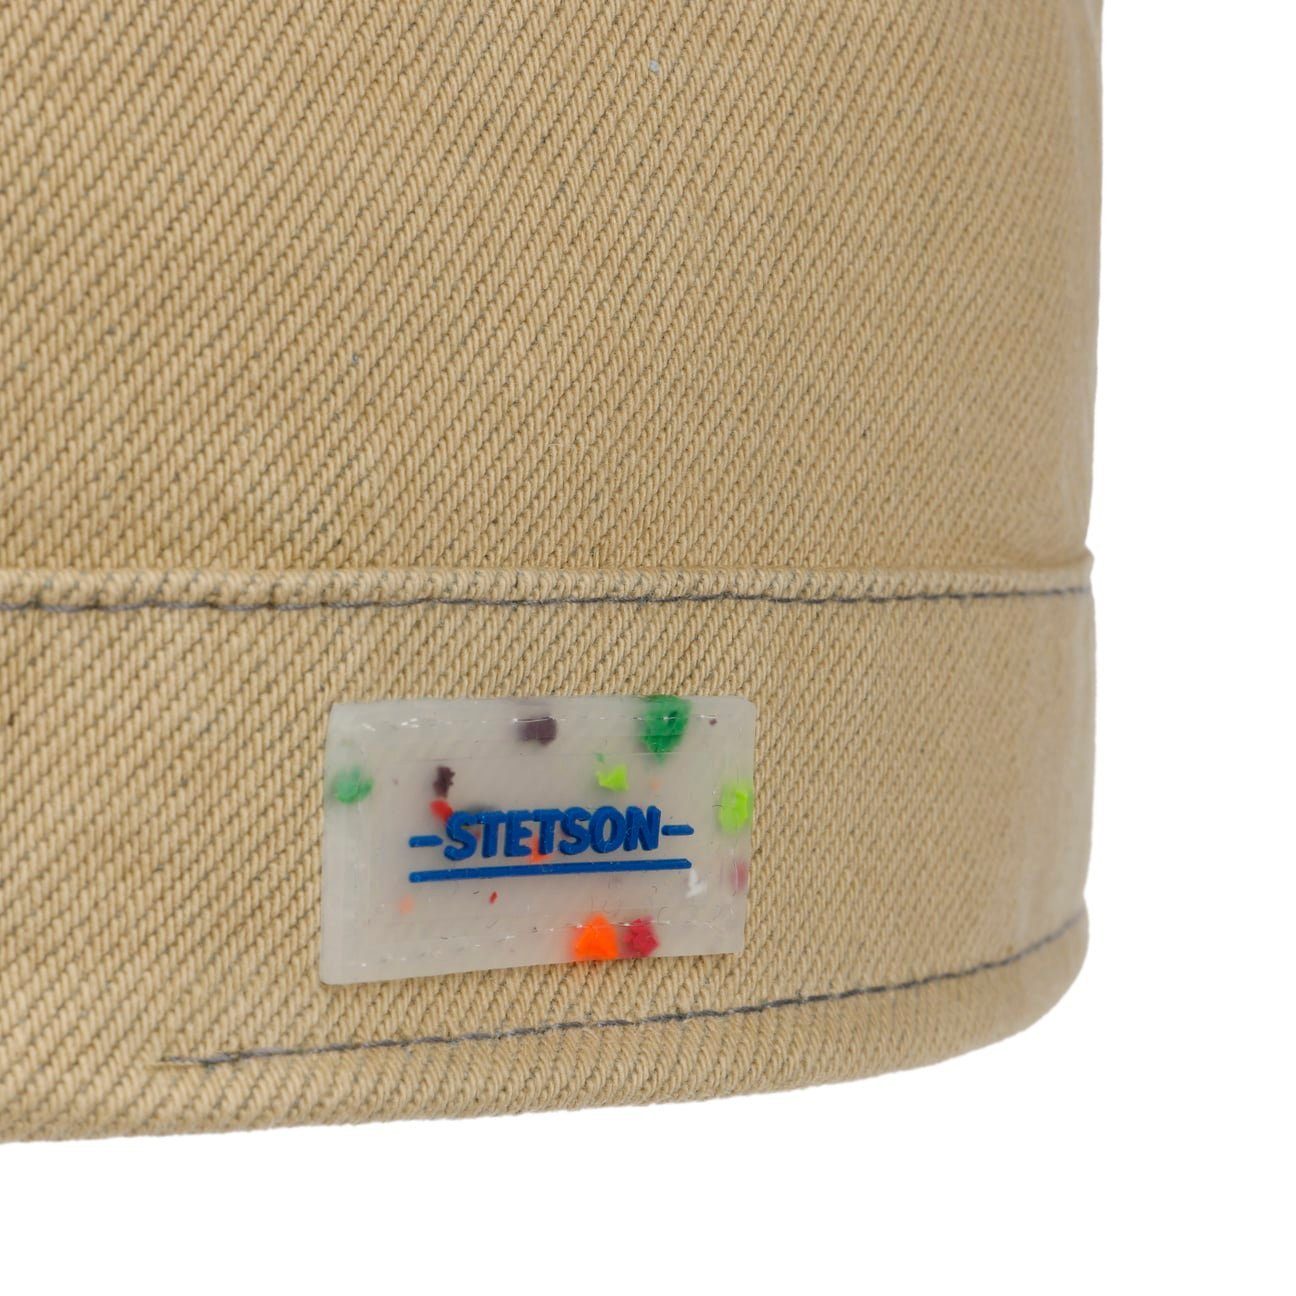 Armycap Made Schirm, the mit Army EU Stetson in Cap (1-St)